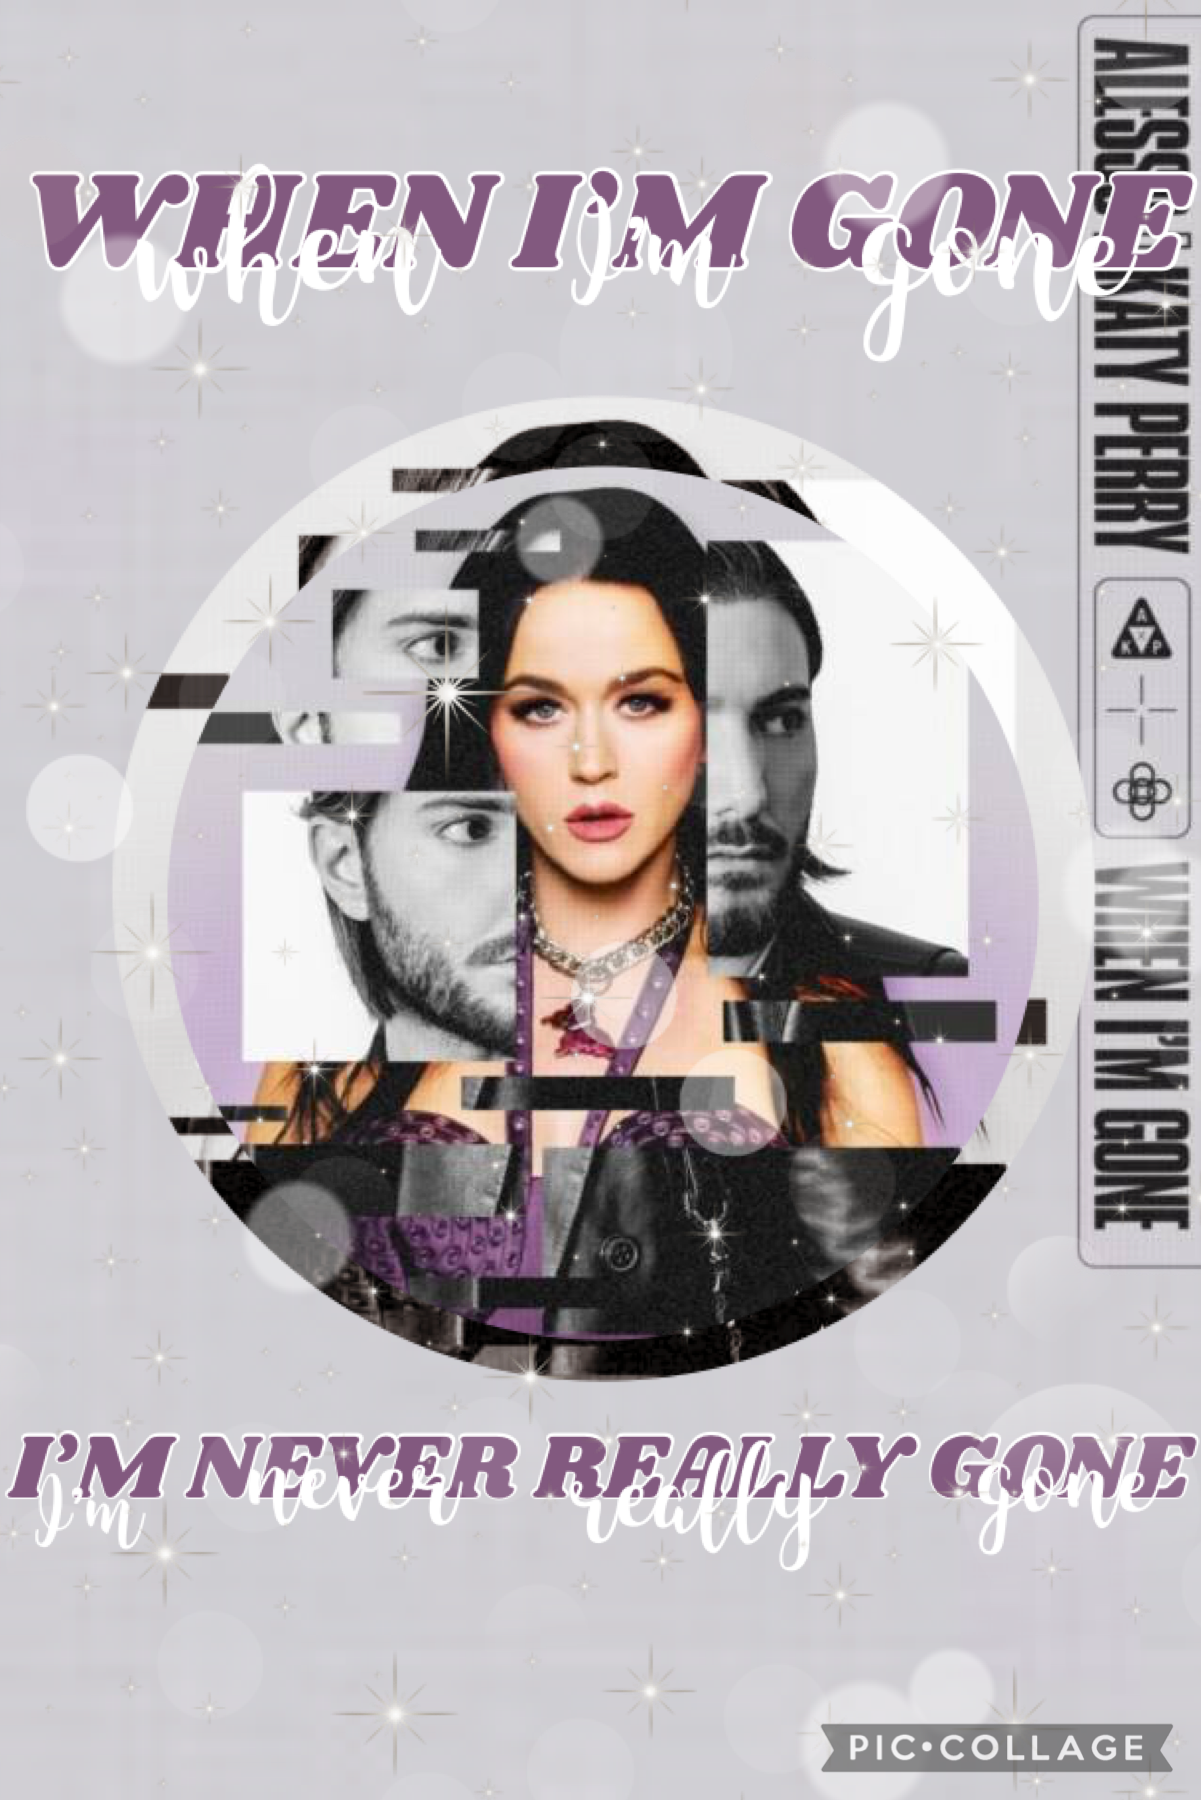 💜 TAP 💜
💜 Katy Perry collage for her song ‘Never Really Gone’ 💜
💜 this collage is simple but i like it :) 💜
💜 i hope u like it :) 💜
💜 LIVE UUU 💜